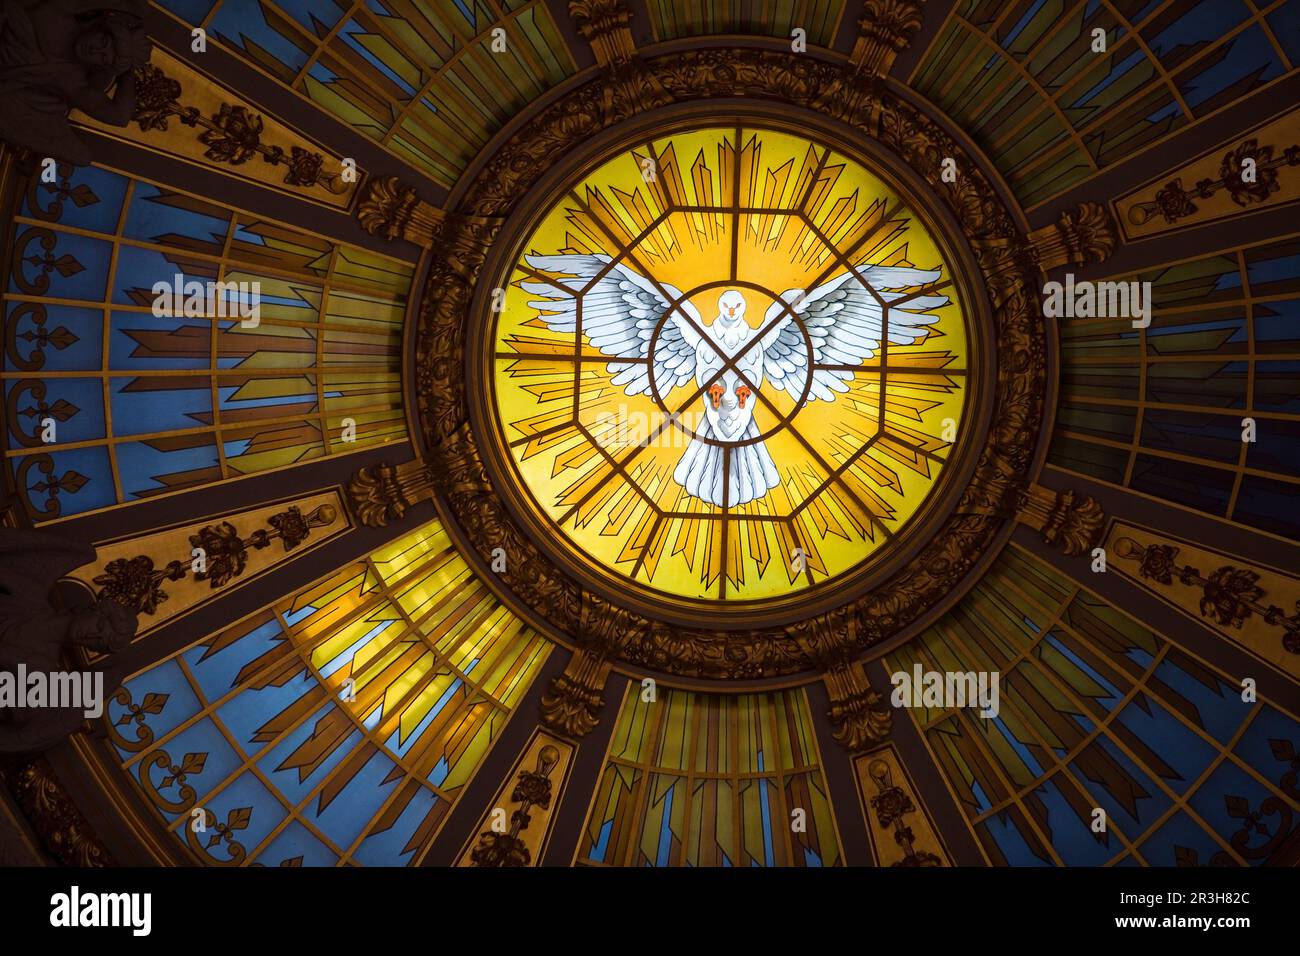 Looking up into the dome with the round, central Holy Spirit window, Berlin Cathedral, Germany Stock Photo